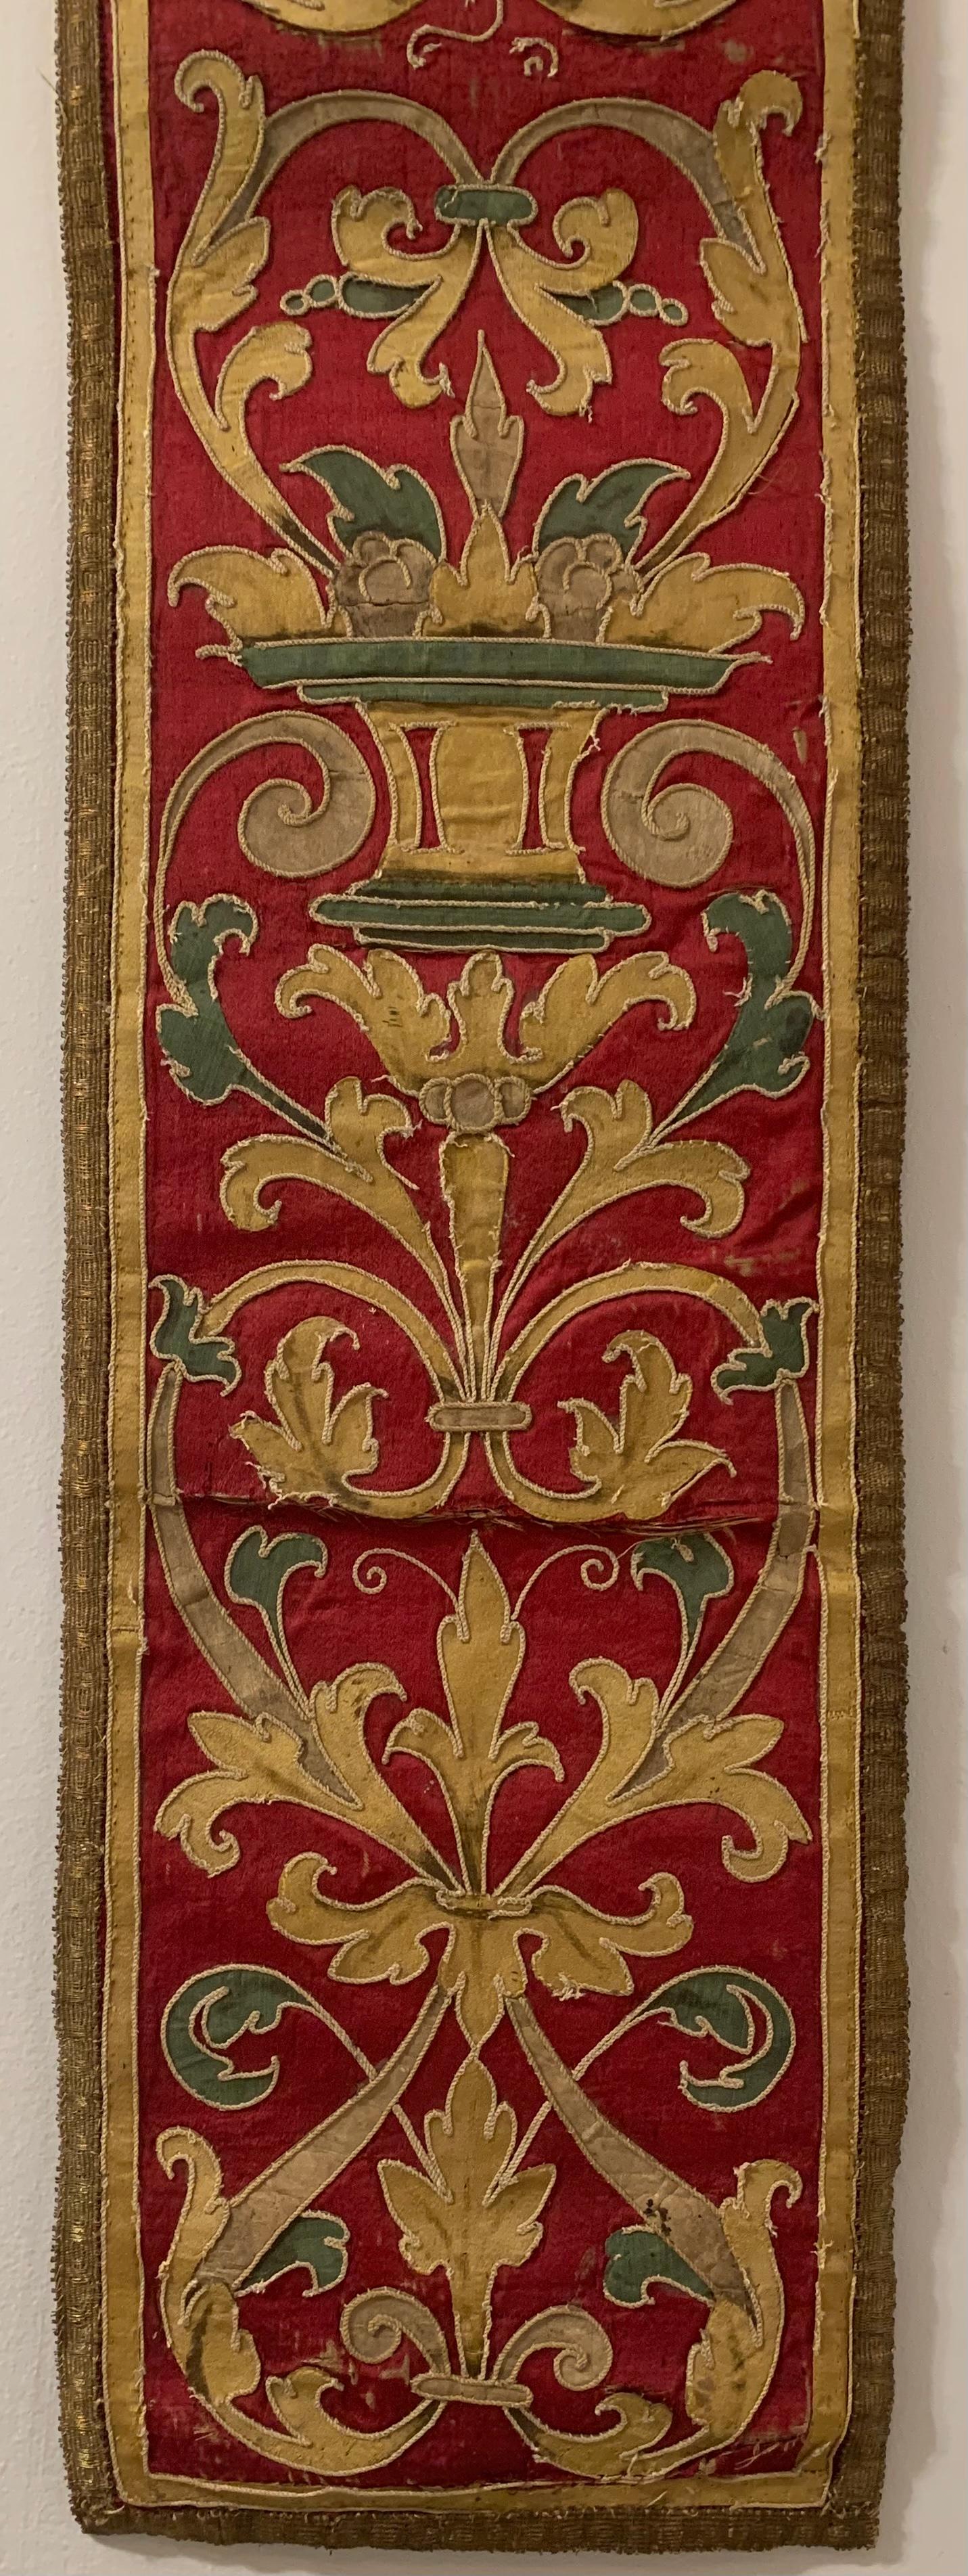 Antique 17th Century Baroque Italian Silk, Metallic Thread Embroidery Panel In Good Condition For Sale In New York, NY